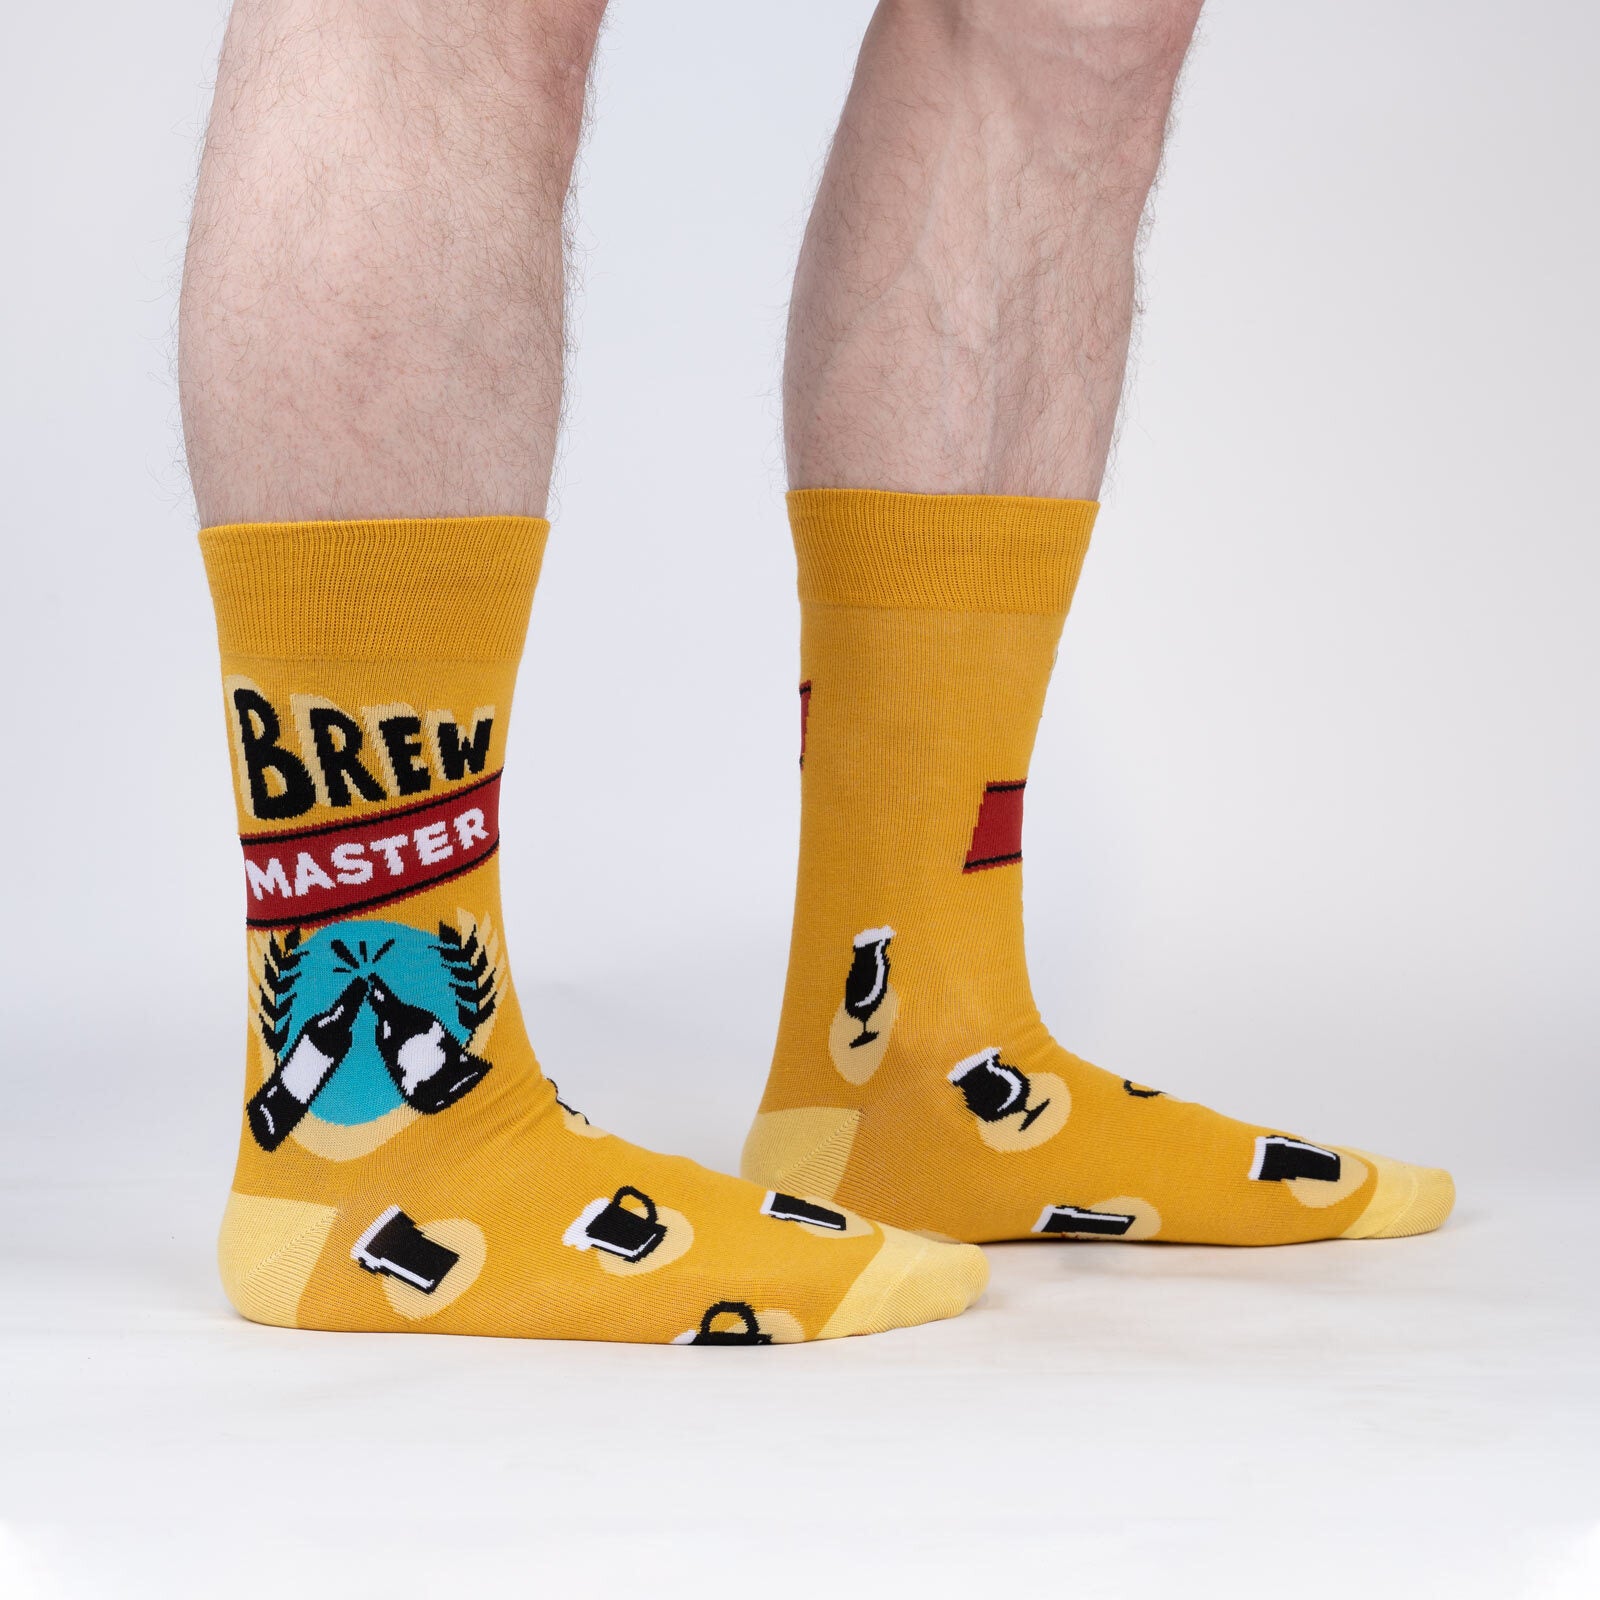 Sock It To Me Brew Master men's crew sock. Featuring yellow sock with "Brew Master" and various beer glasses all over. Socks worn by model seen from the side. 